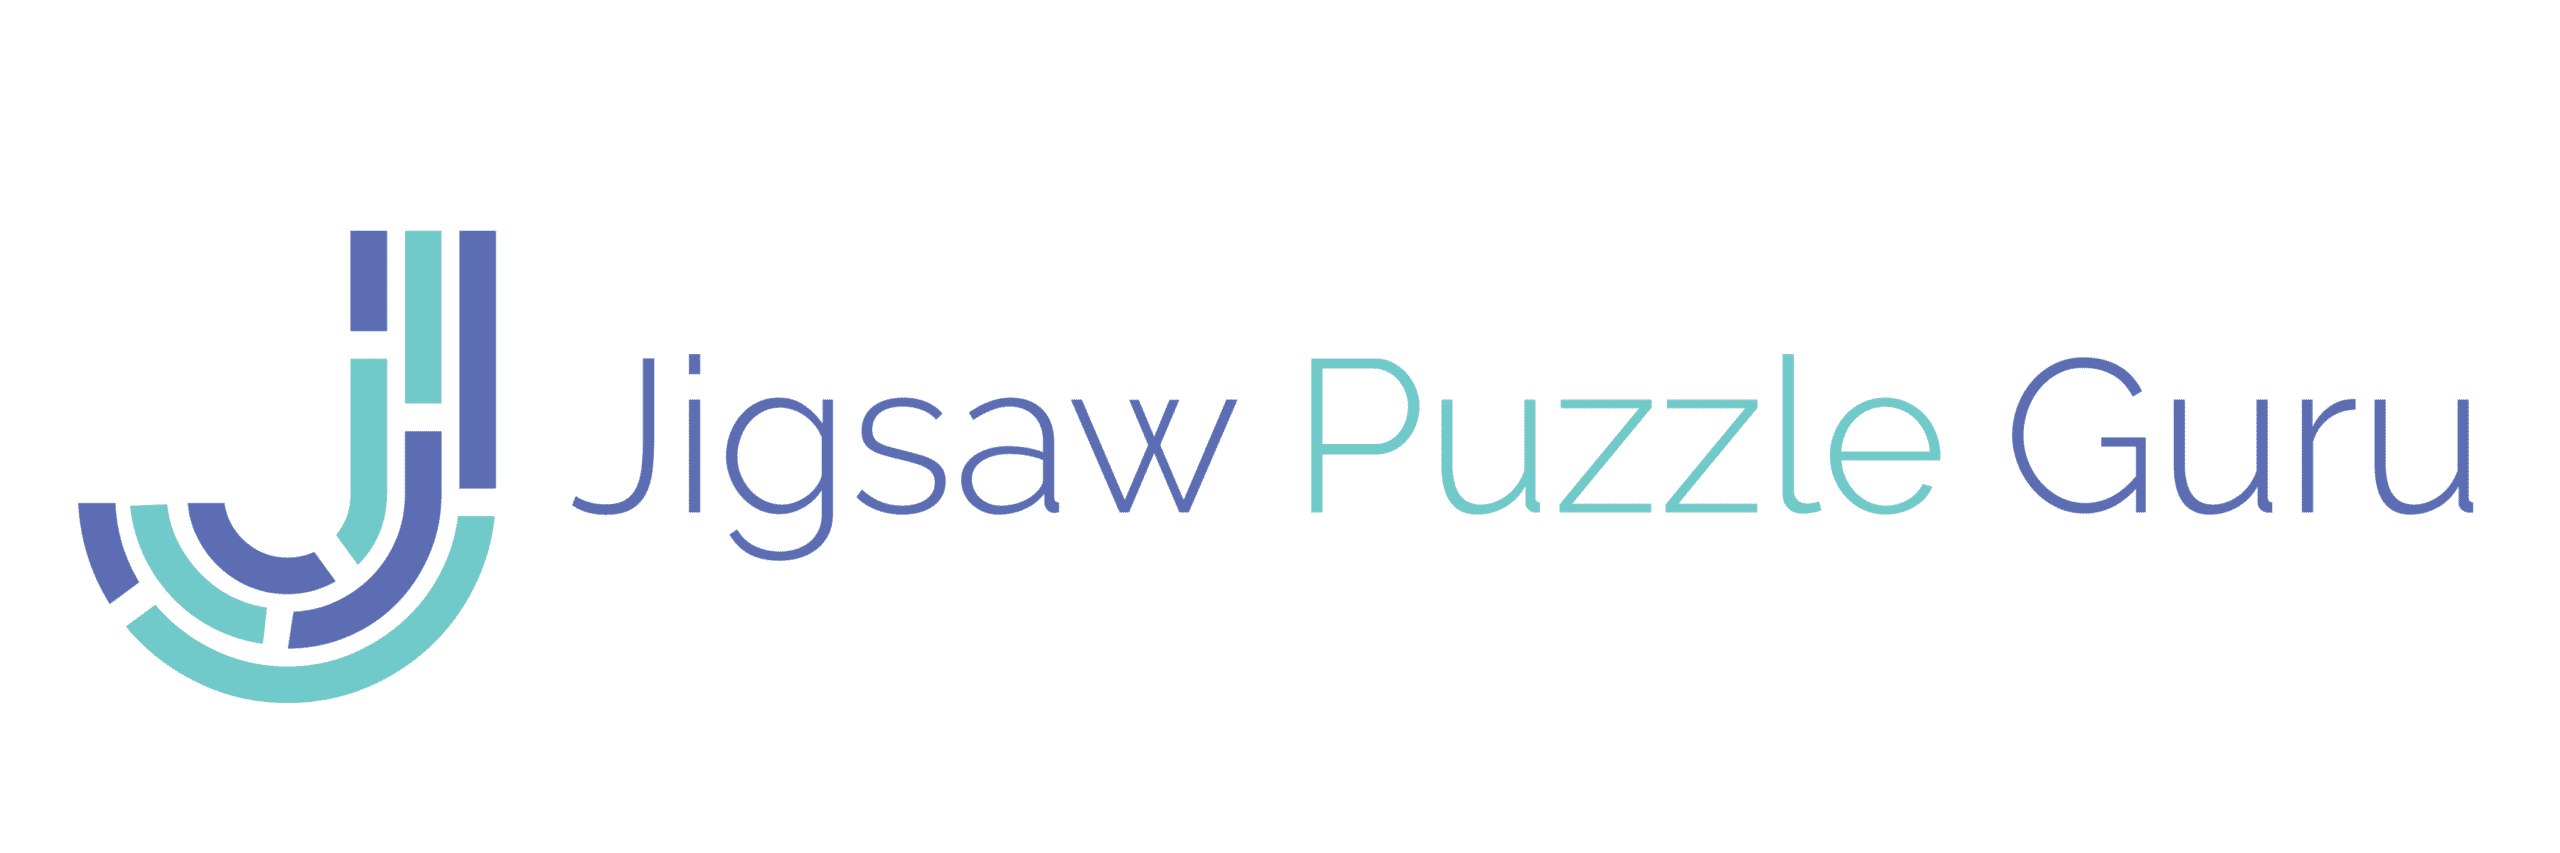 How to Glue and Frame a Puzzle - Jigsaw Puzzle Guru